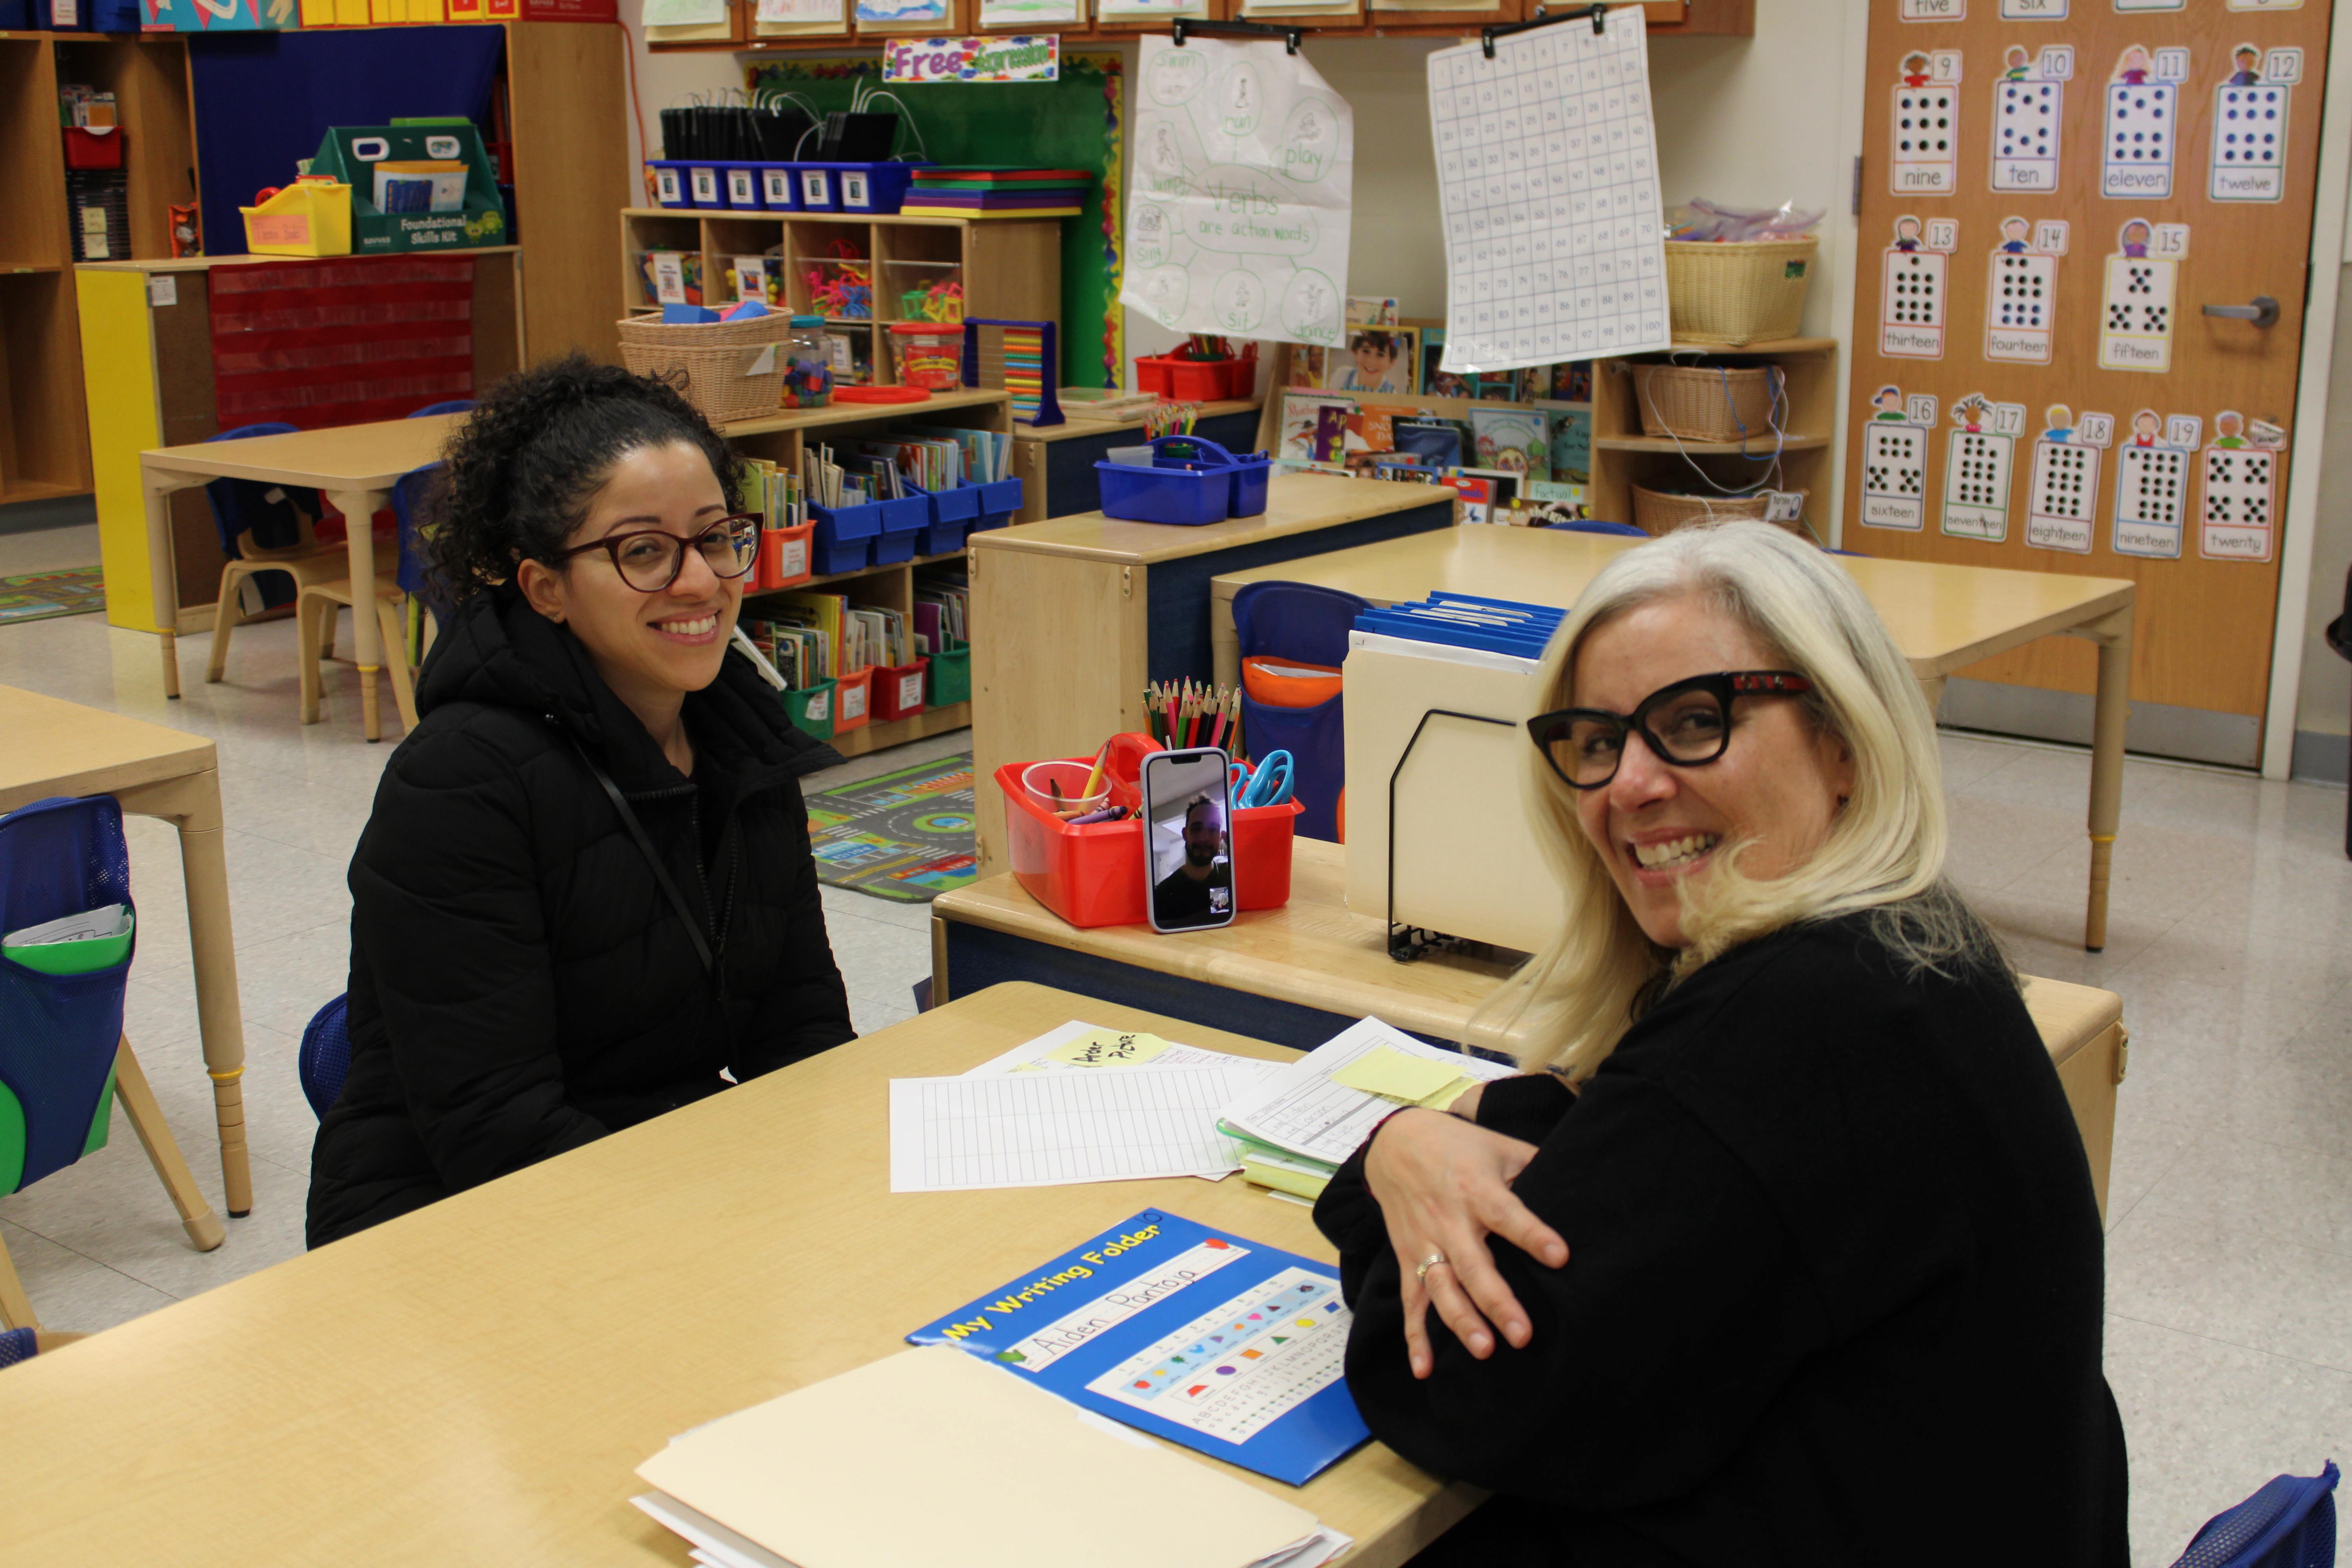 Parents' Night at the Colin Powell School